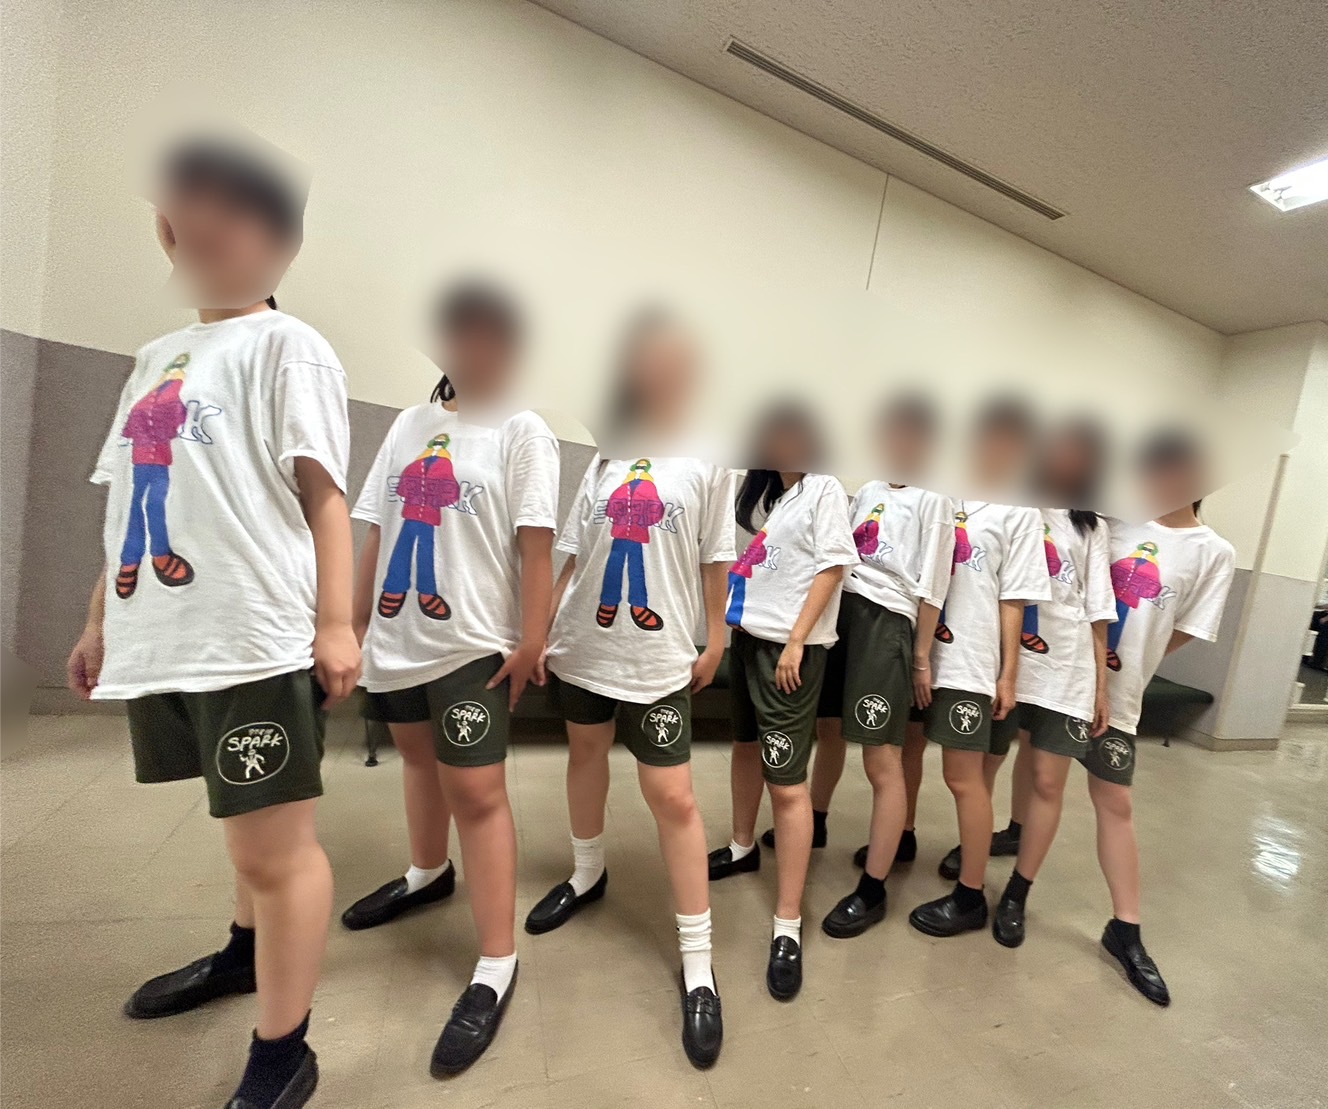 <strong>【長崎東高校ダンス部SPARK様】（長崎市）</strong><br>ありがとうございます！